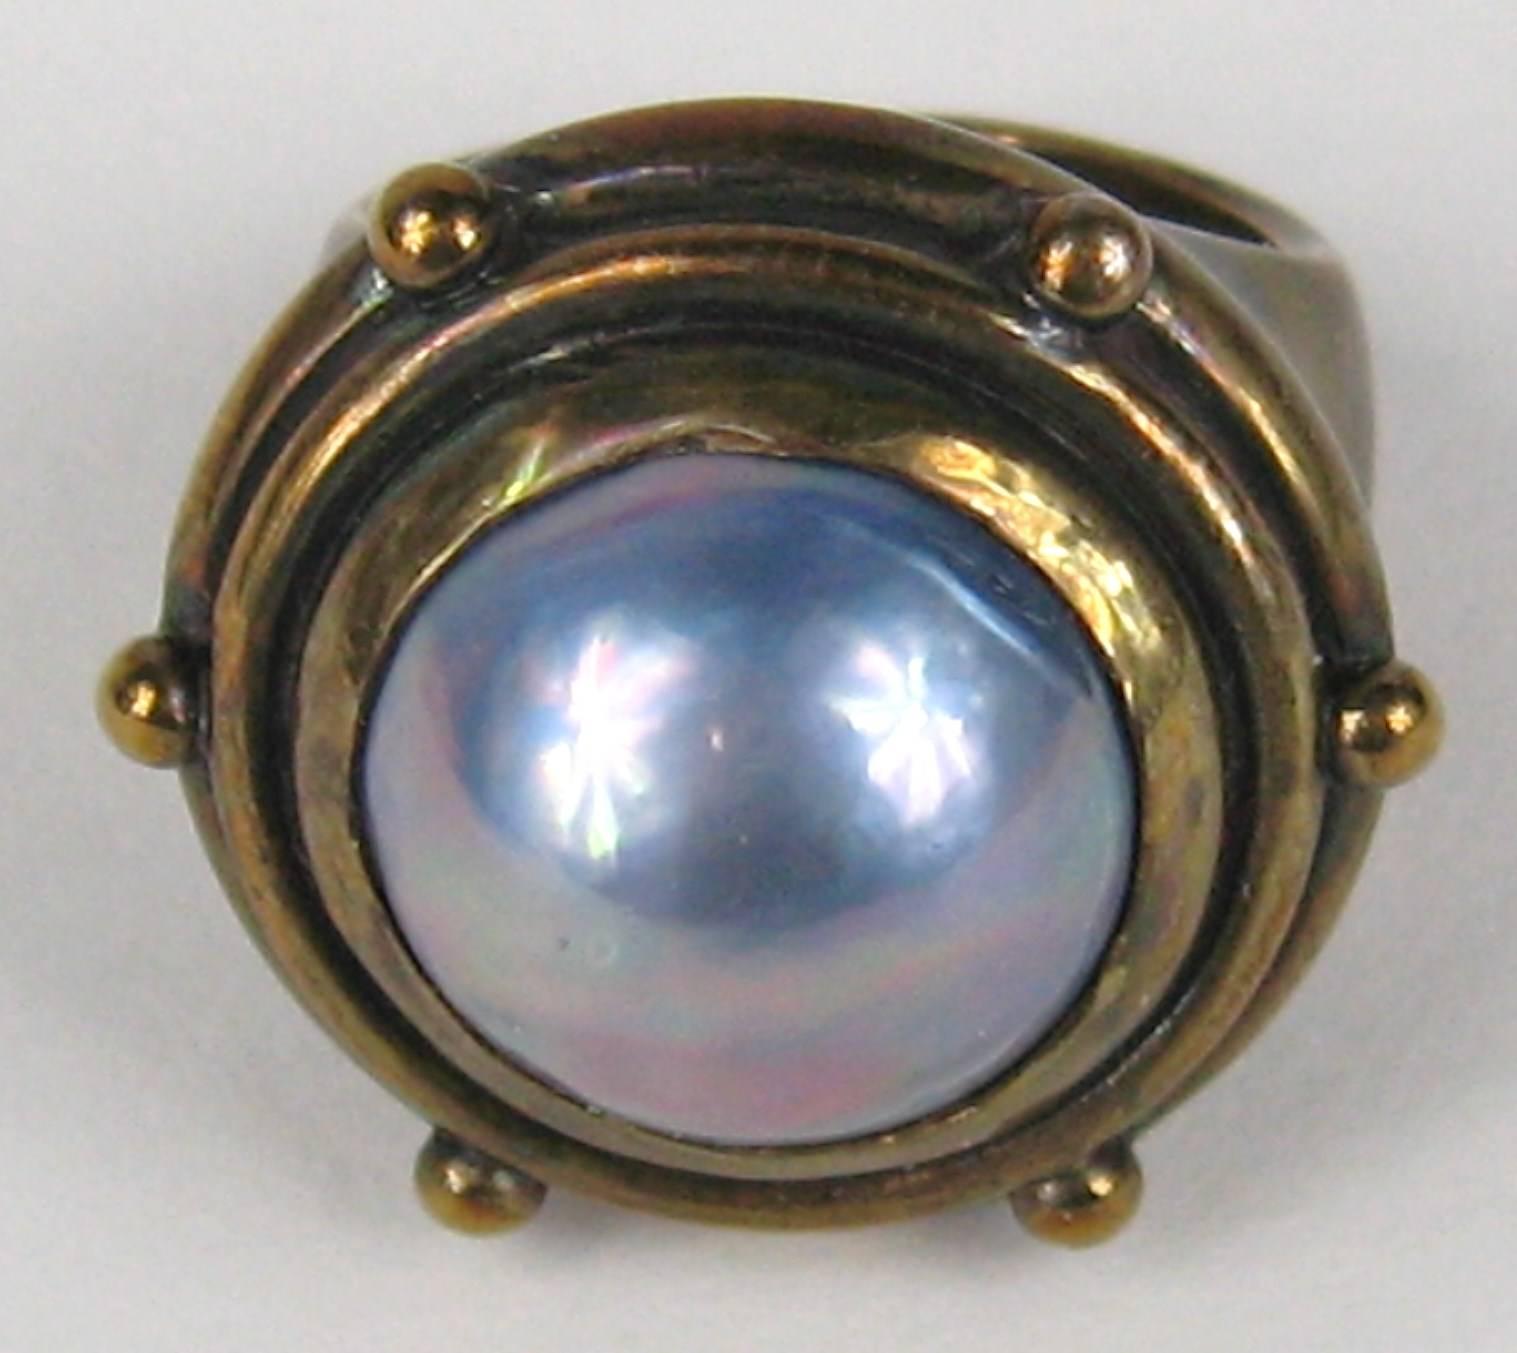 Large center Pearl on the Dweck Ring.  Size 6-3/4 in Top of ring is .86 in in diameter. Color on the pearl closer to purple. 
This is out of a massive collection of Hopi, Zuni, Navajo, Southwestern, sterling silver, costume jewelry and fine jewelry